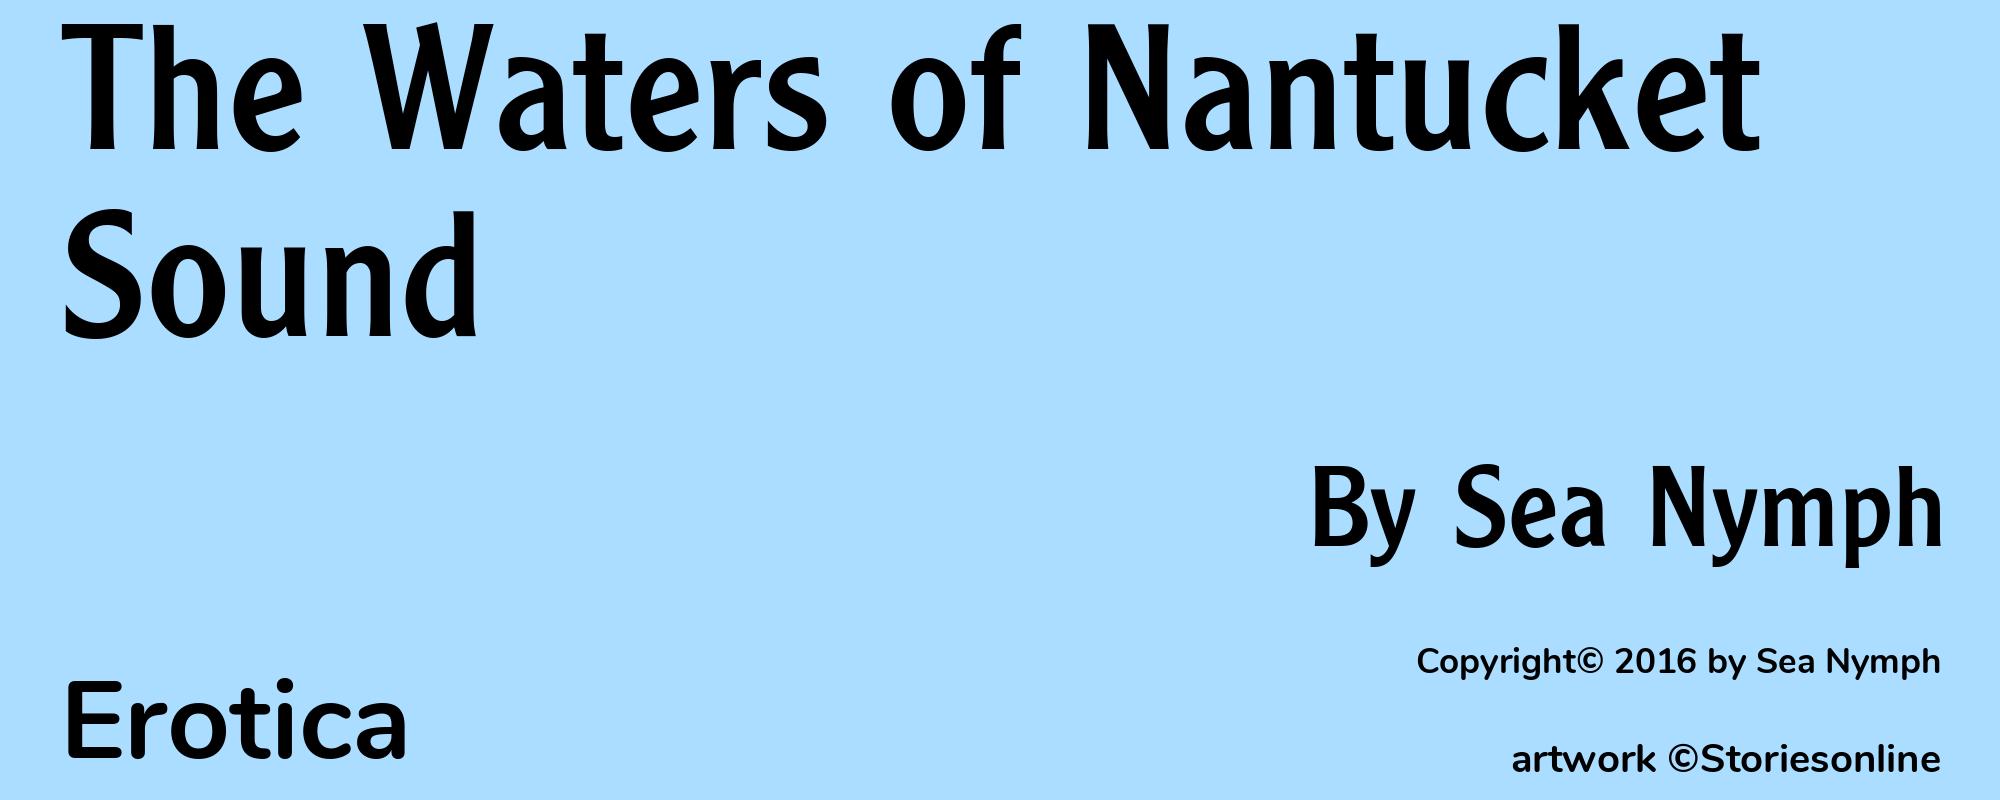 The Waters of Nantucket Sound - Cover